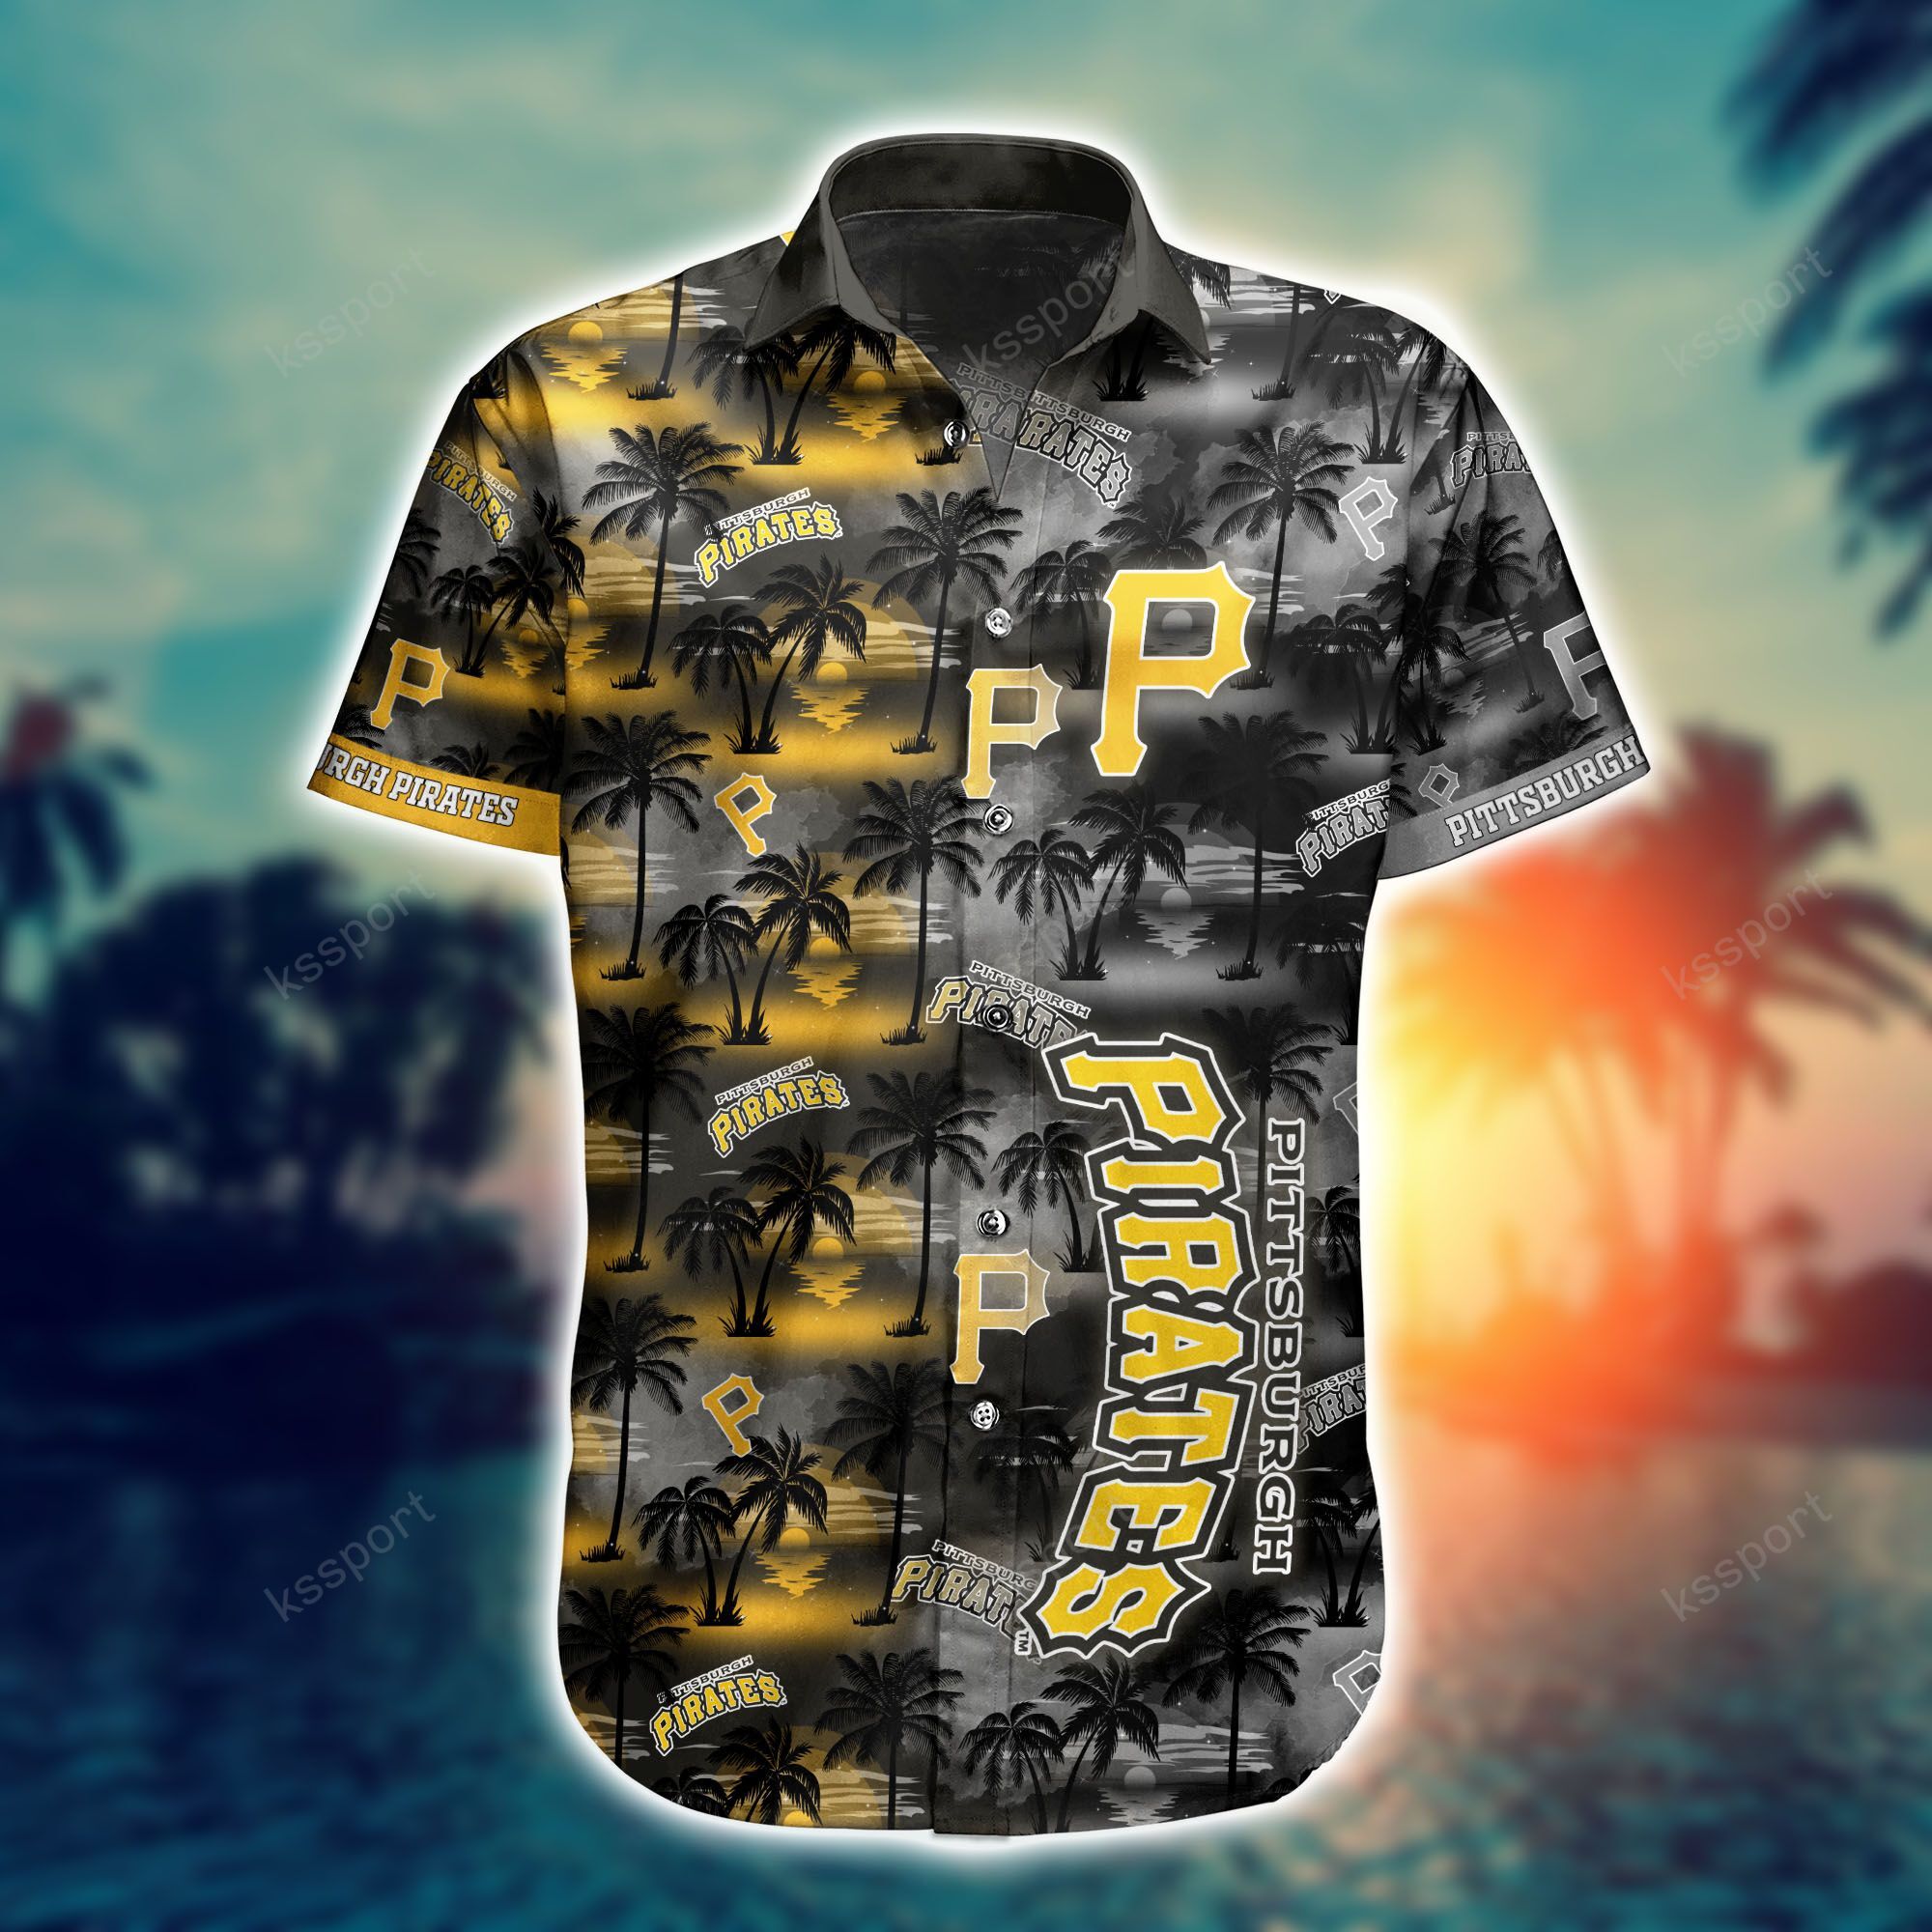 Top cool Hawaiian shirt 2022 - Make sure you get yours today before they run out! 236